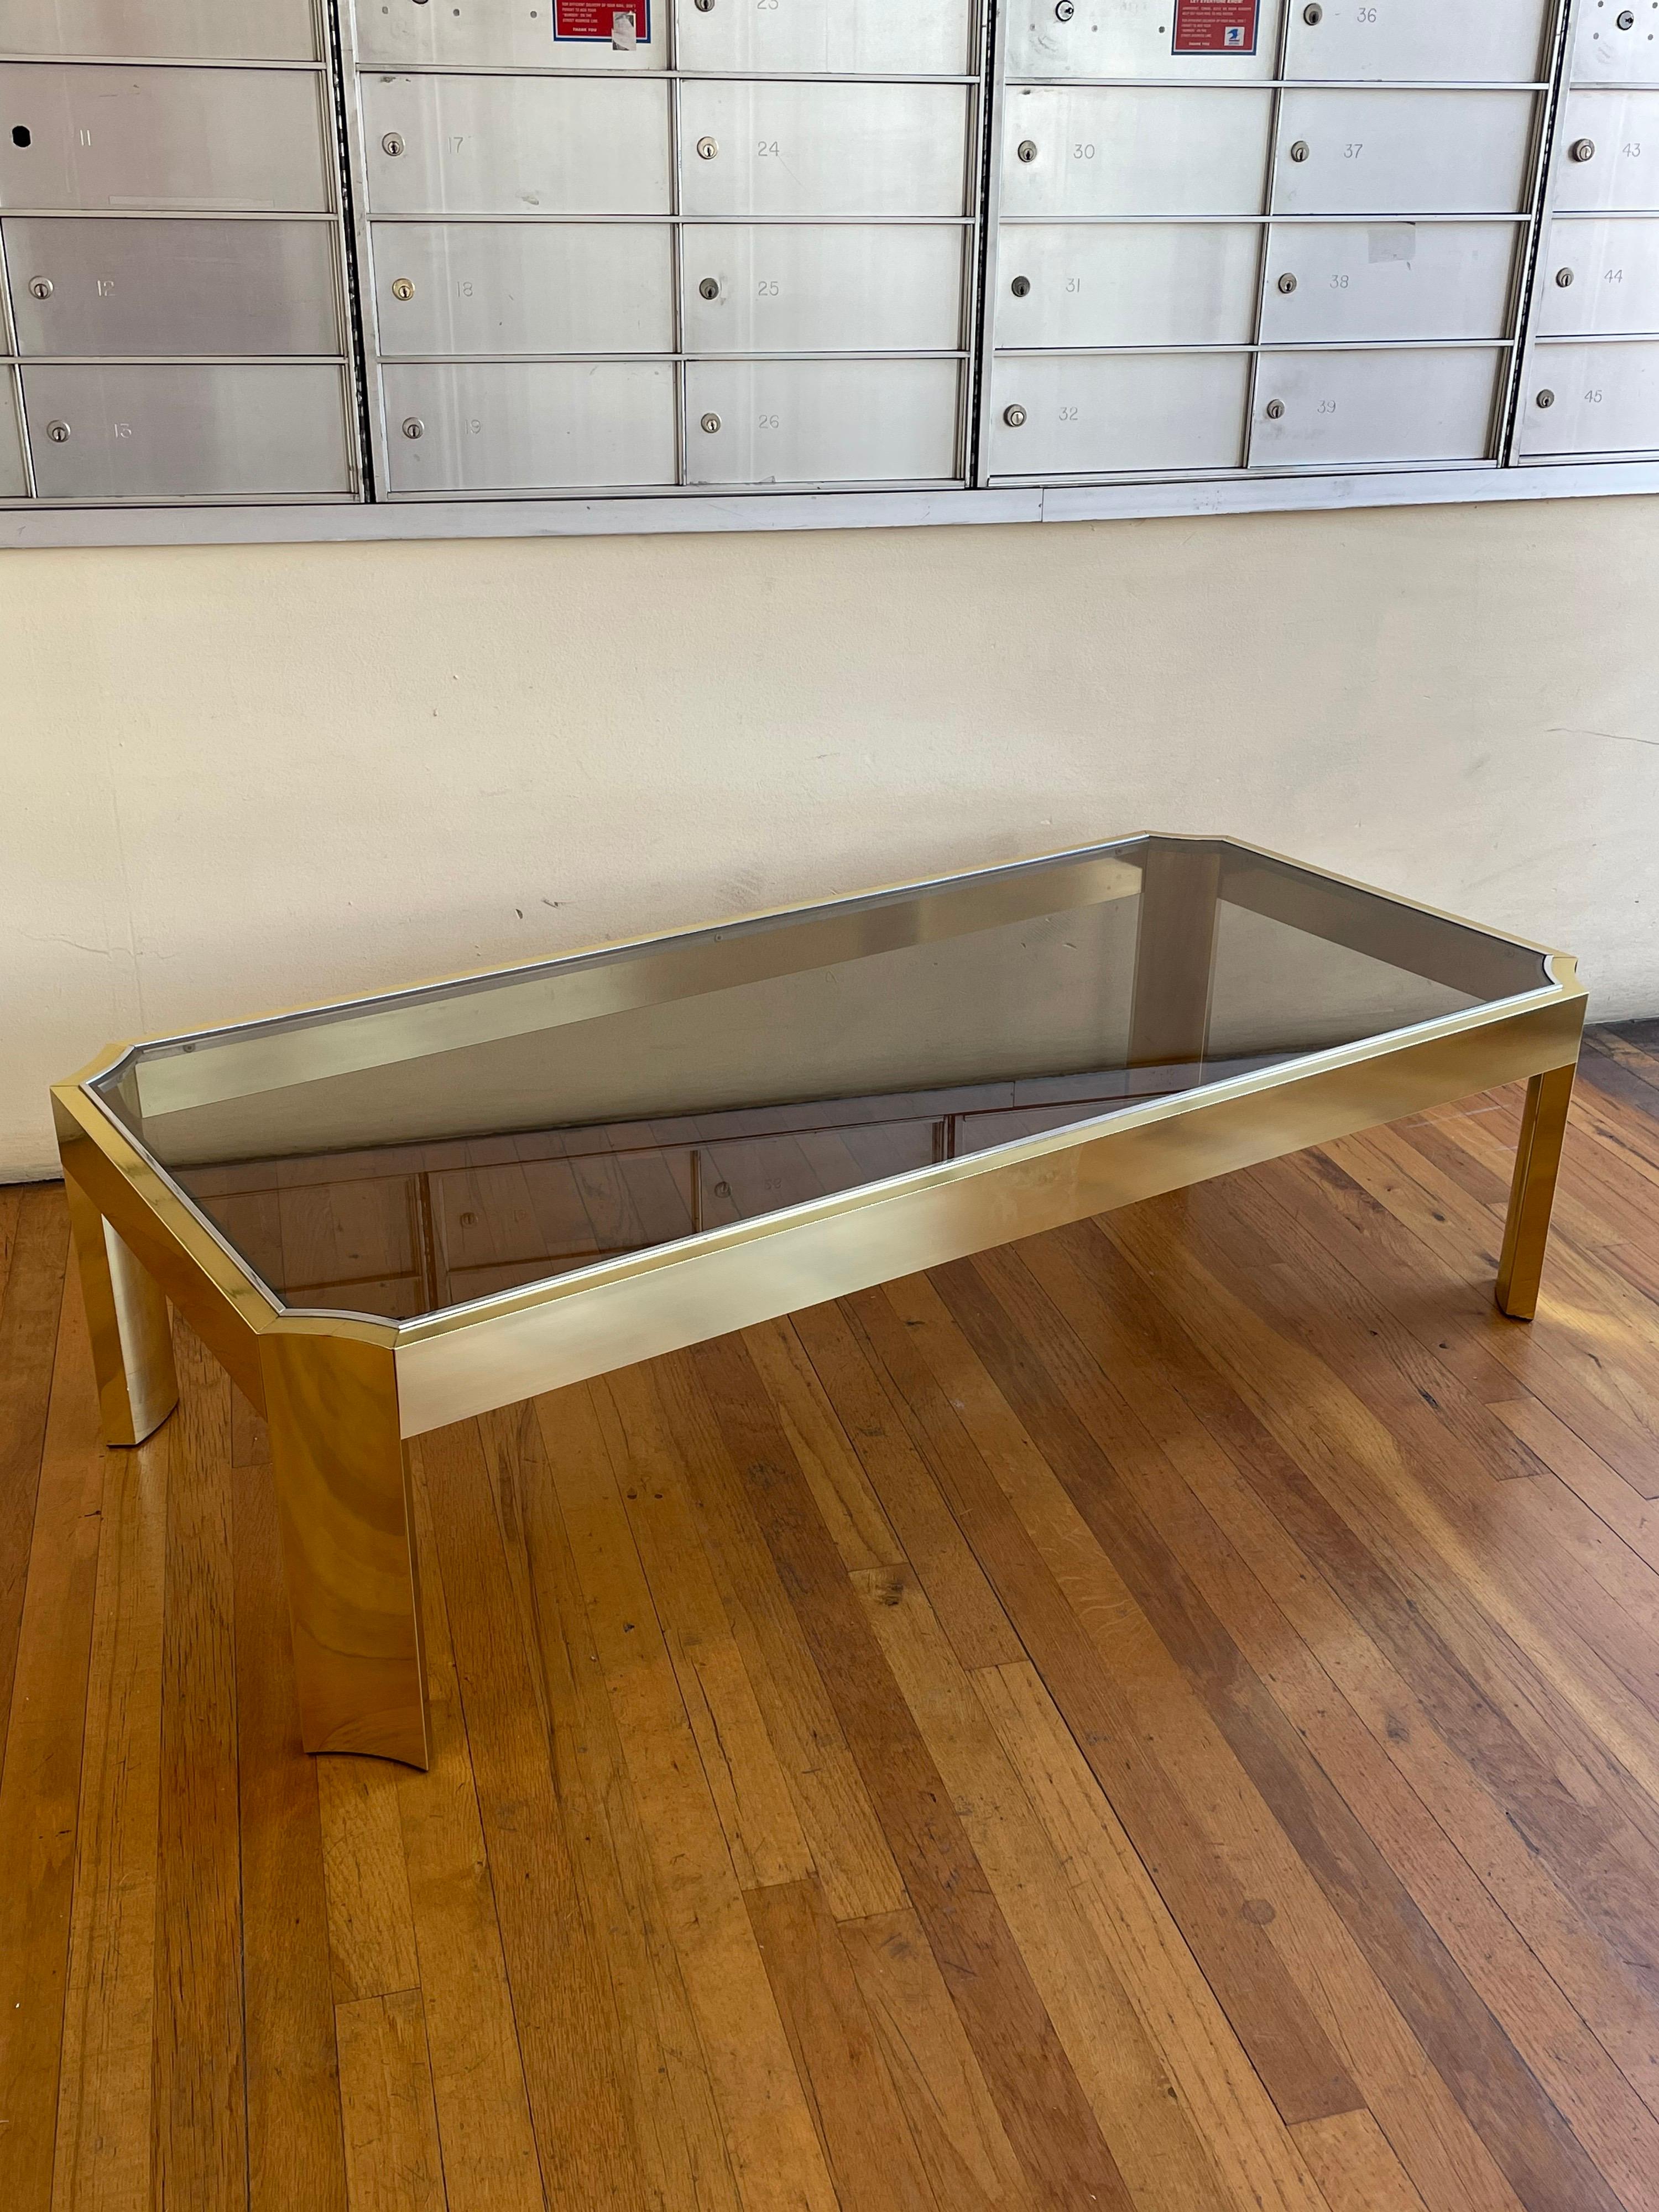 Incredible anodized aluminum with brass finish and chrome trim coffee table with smoke glass top, circa 1970's very clean condition concave legs rare piece.